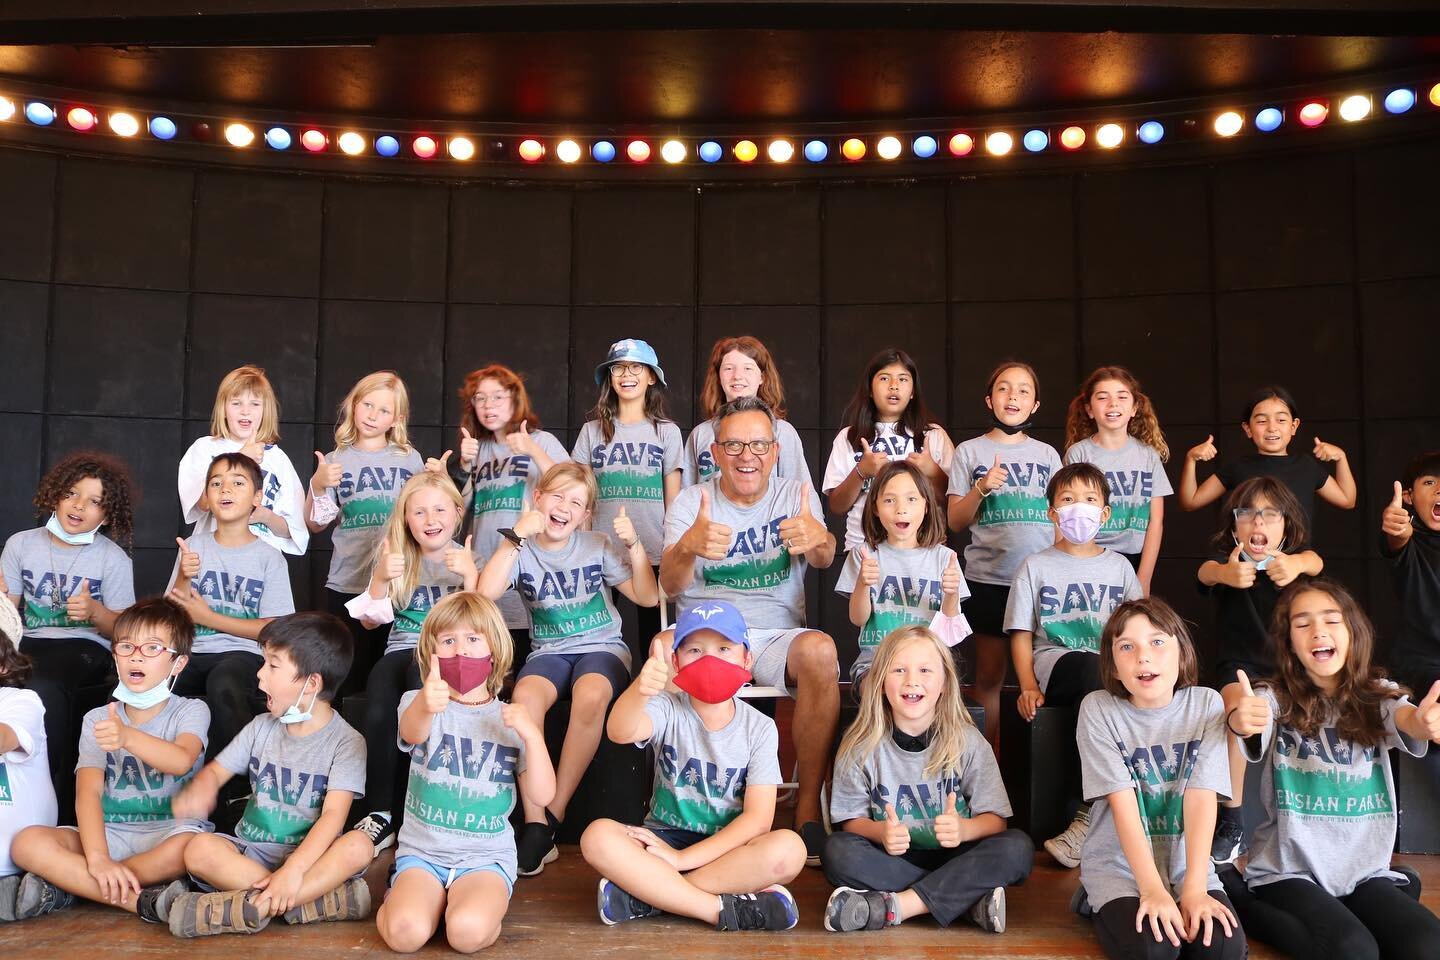 Our Co-President, Dan Reza, presented to the amazing young actors at the @losangelestheatreacademy 🎭 who gather at the Adaptive Rec Center in Elysian Park. The presentation included an energized conversation about keeping Elysian Park open and acces